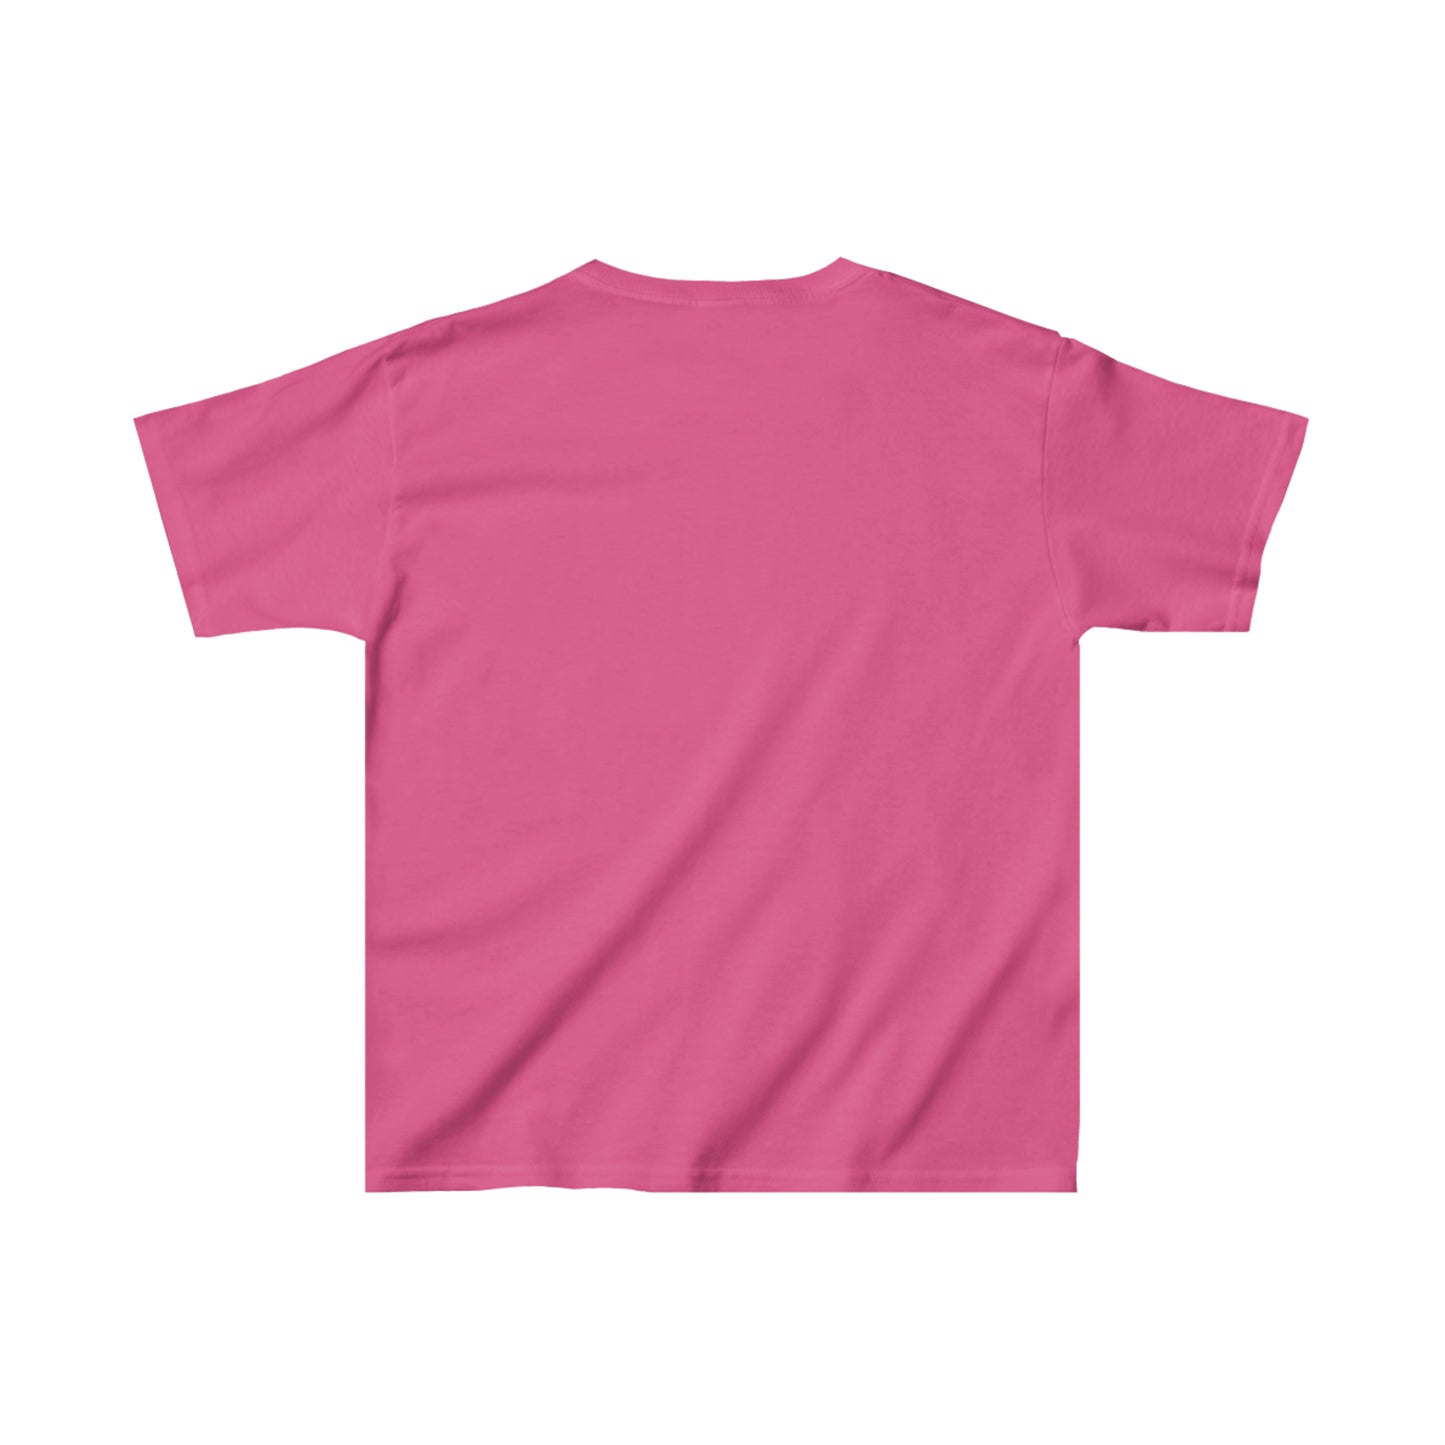 KIDS - I SUPPORT UPW WOMENS DIVISION PRINTED TEE